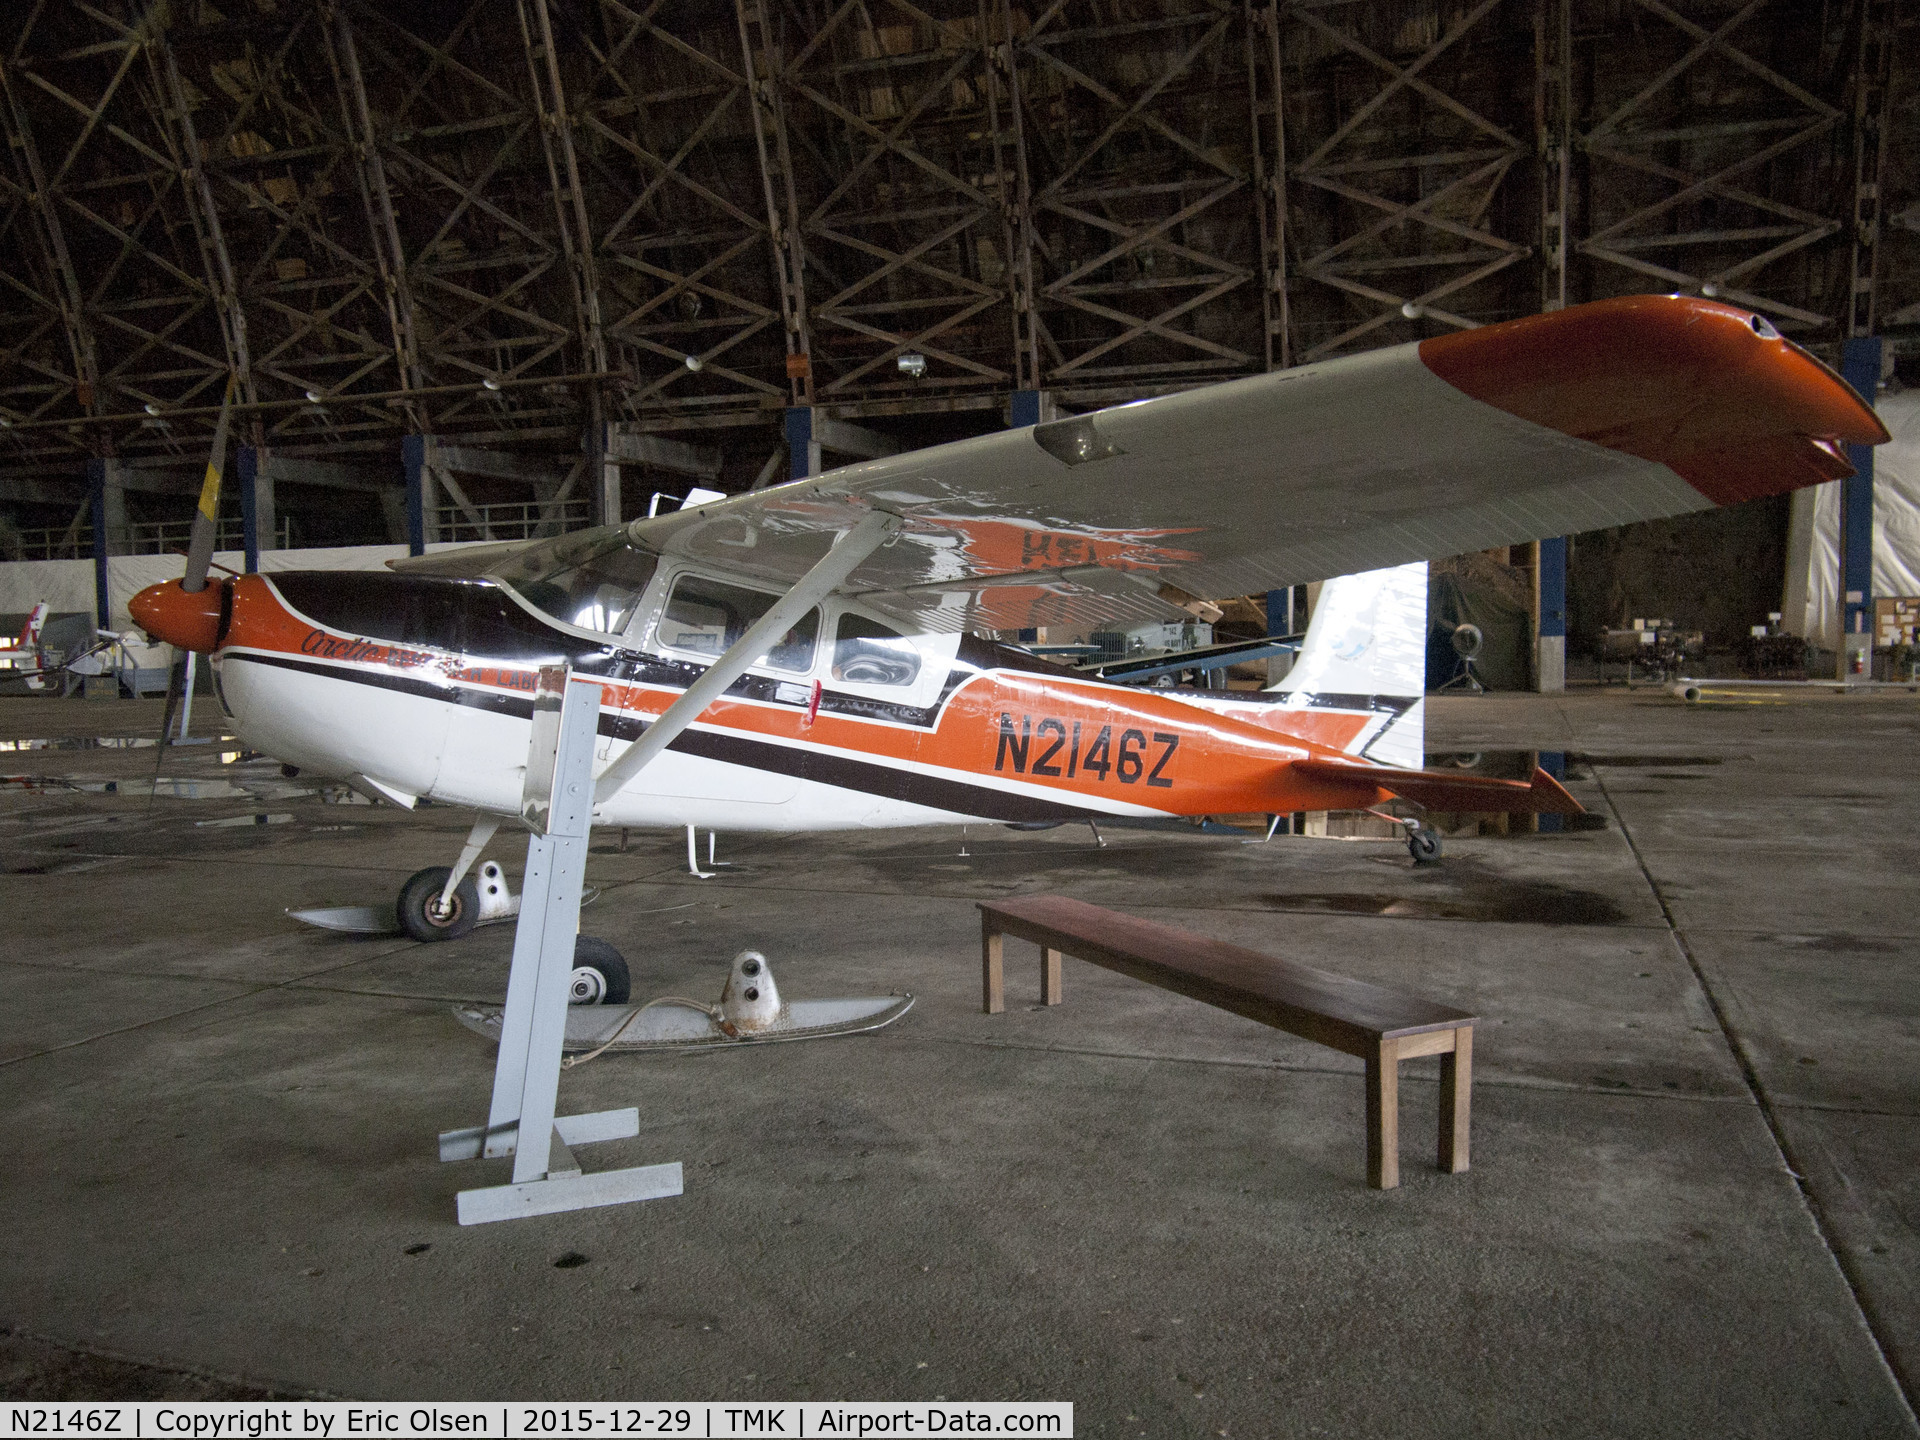 N2146Z, 1963 Cessna 180F C/N 18051246, 1963 Cessna at the Tillamook Air Museum. This is one of 2 that were the first light aircraft to fly over the North Pole.